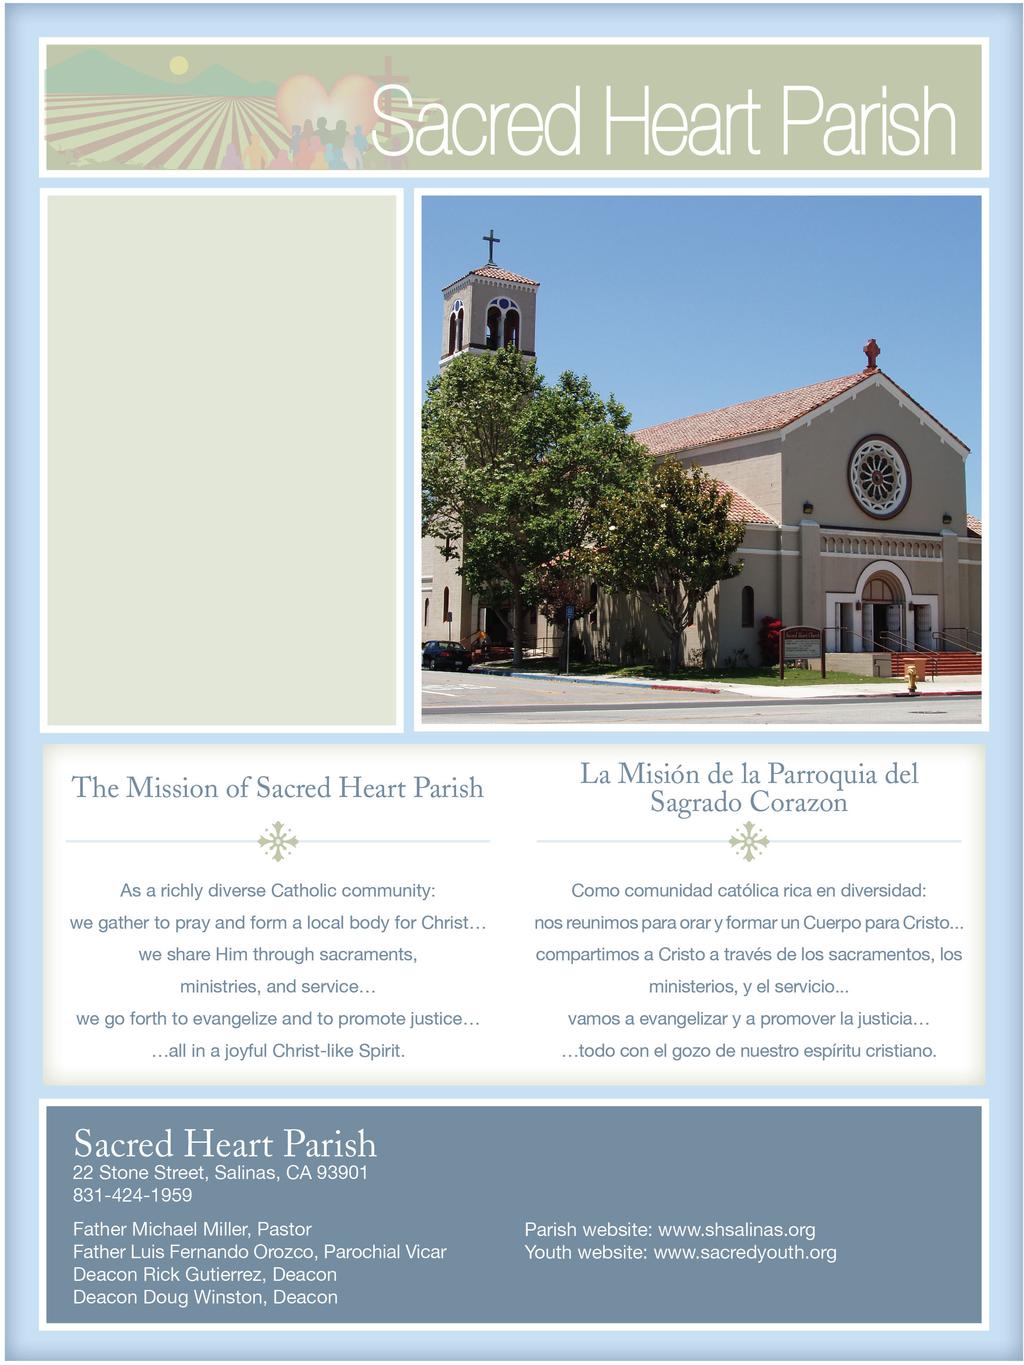 Weekly Bulletin Second Sunday of Lent Segundo Domingo de Cuaresma February 28, 2010 Pastor s Letter Mass Schedule Weekly Calendar Faith Formation News...and more!